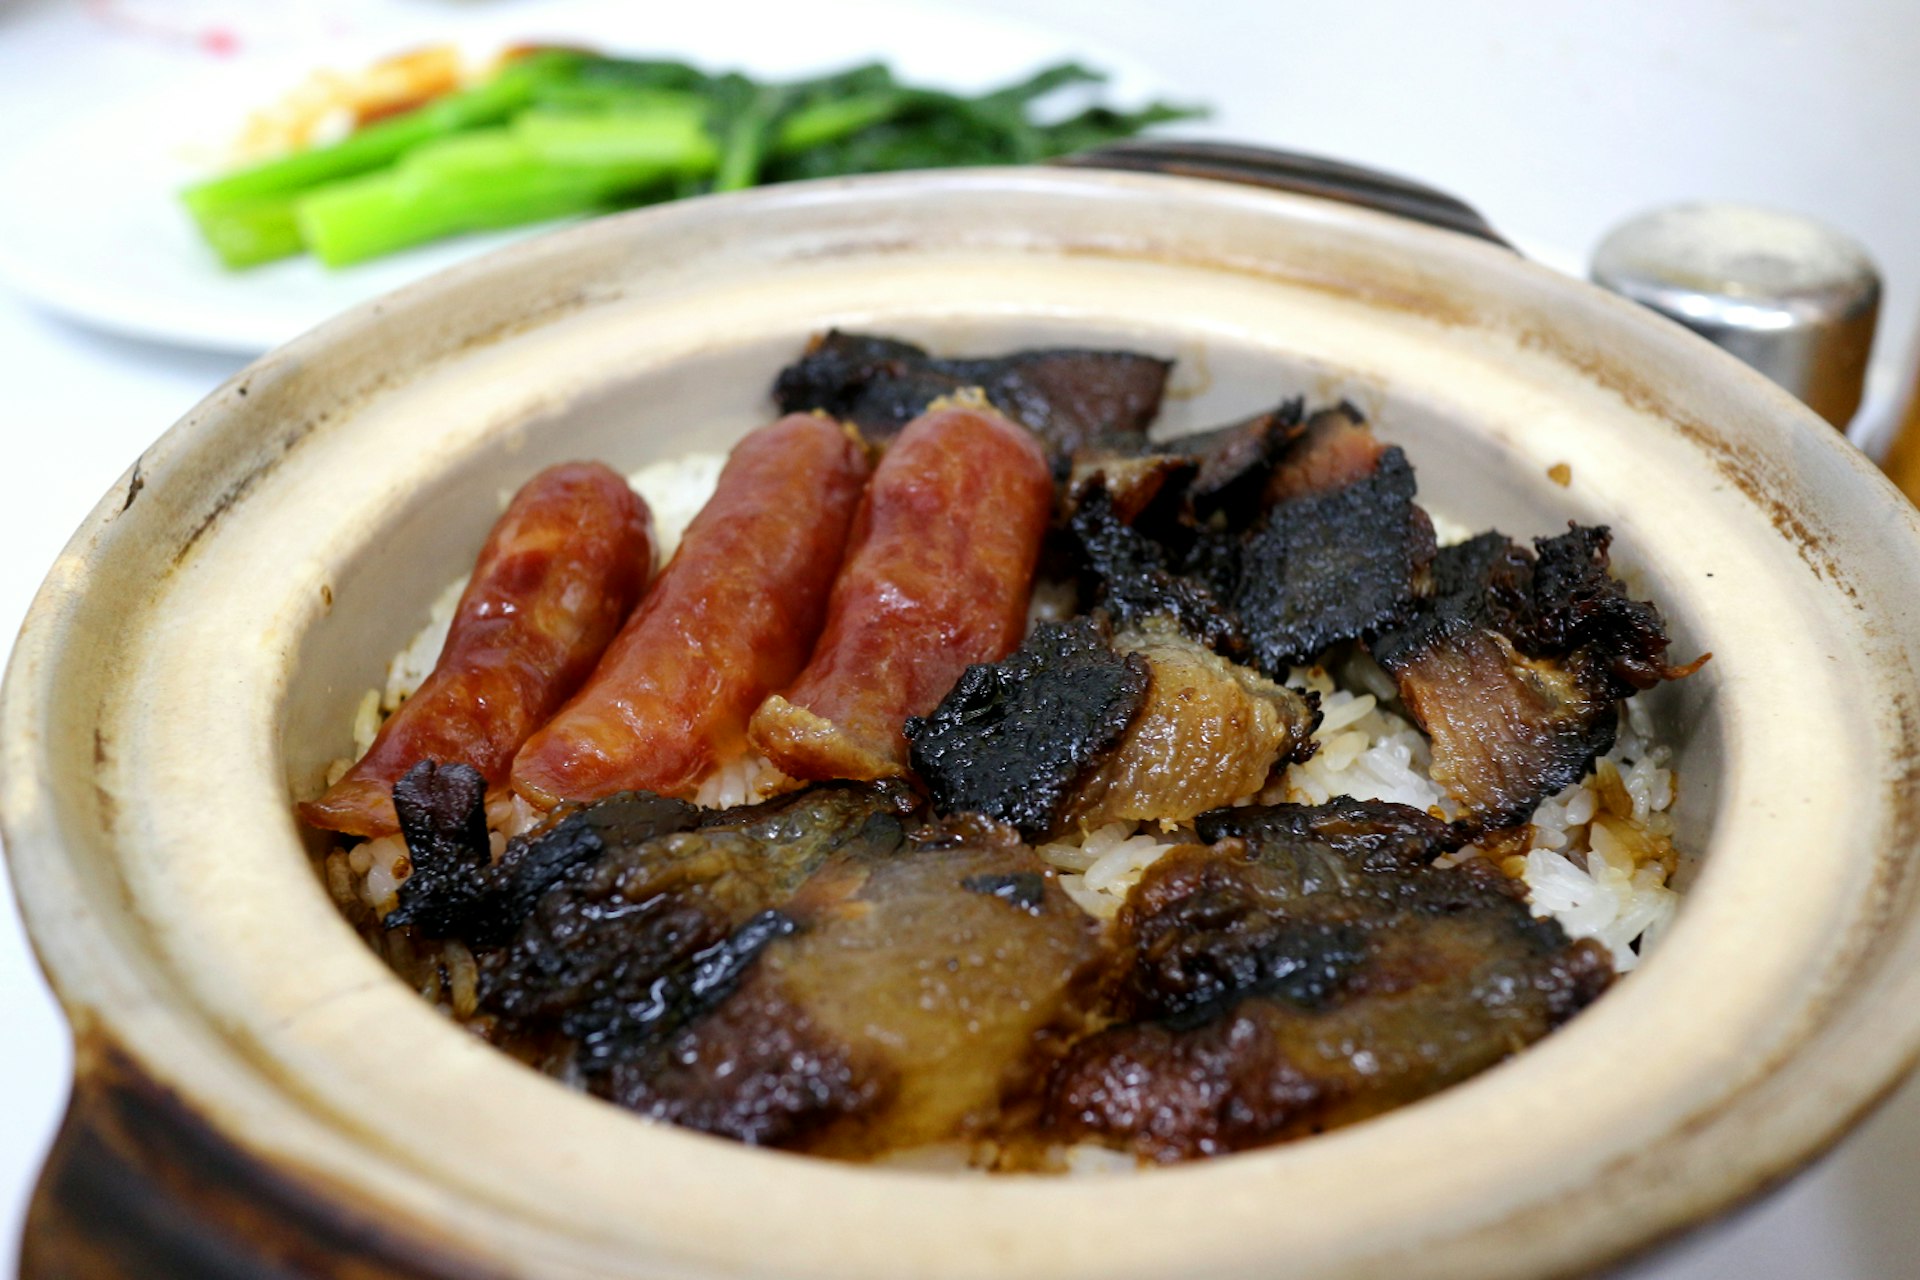 Claypot rice with Chinese sausages and cured pork. Image by Piera Chen / Lonely Planet